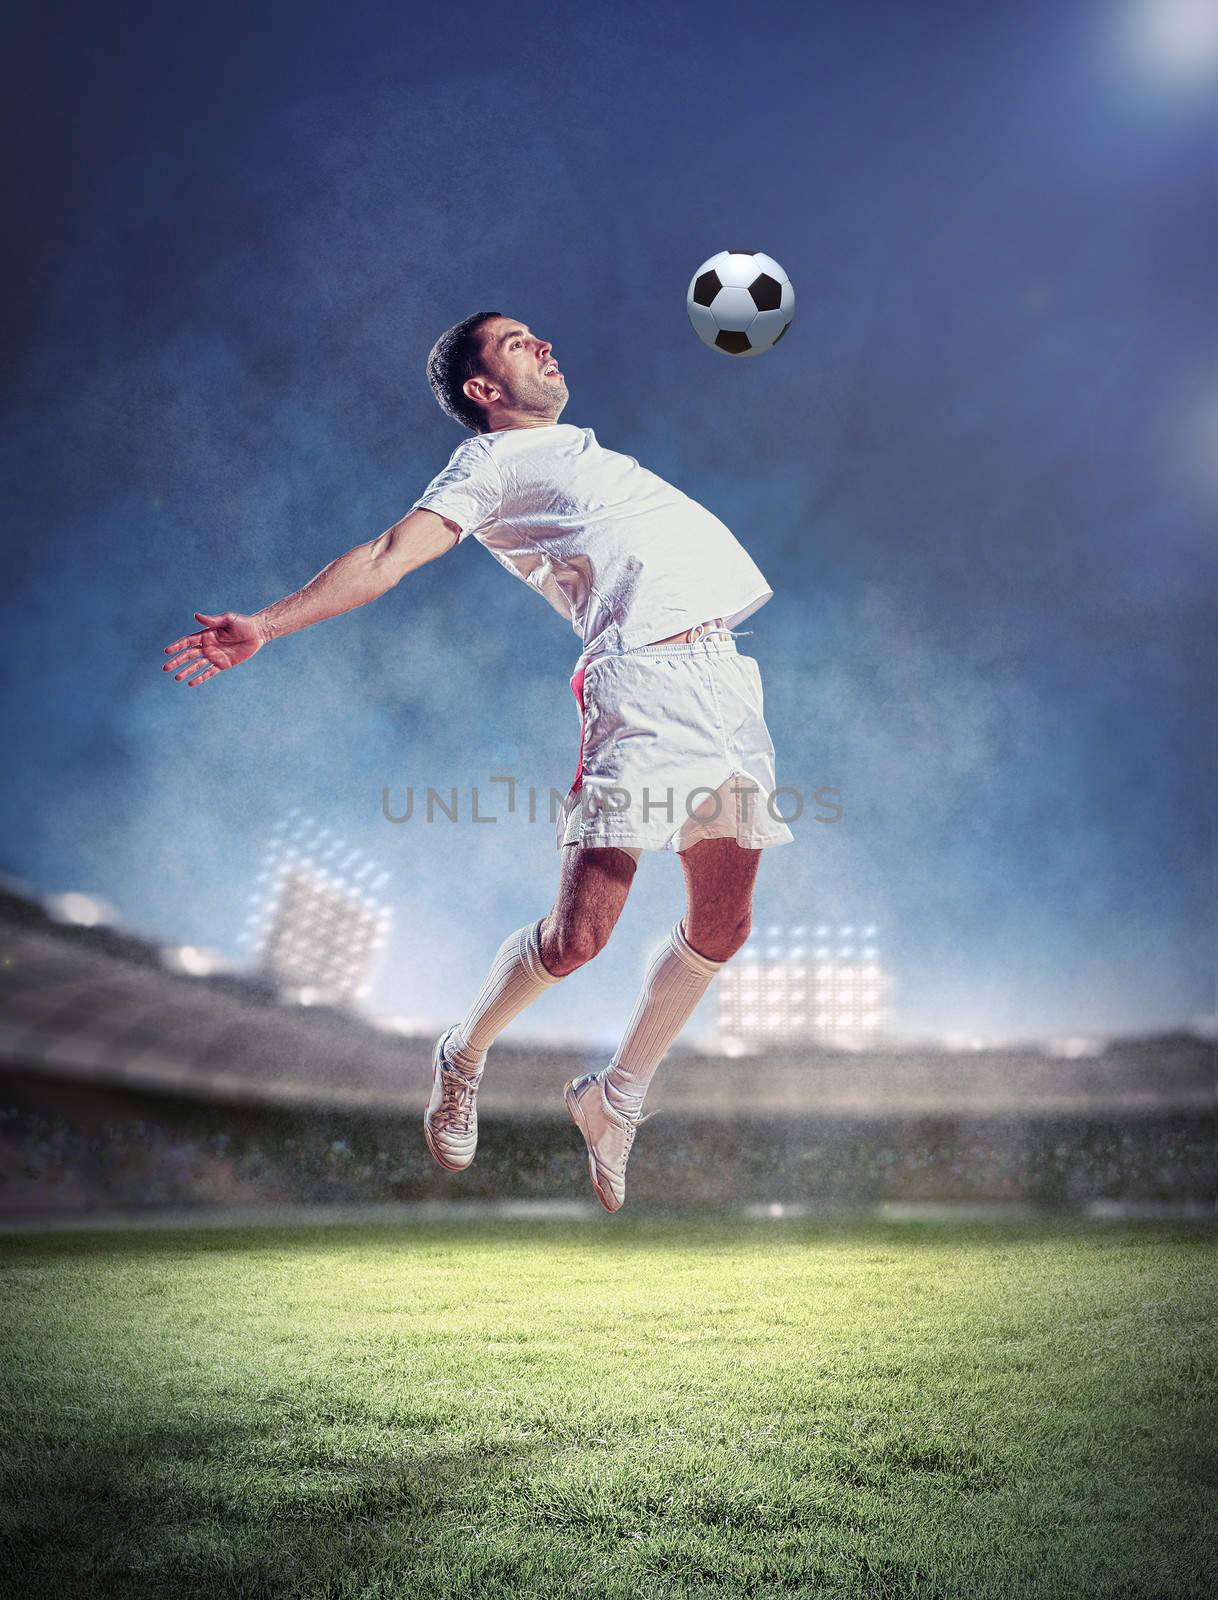 football player in white shirt striking the ball at the stadium